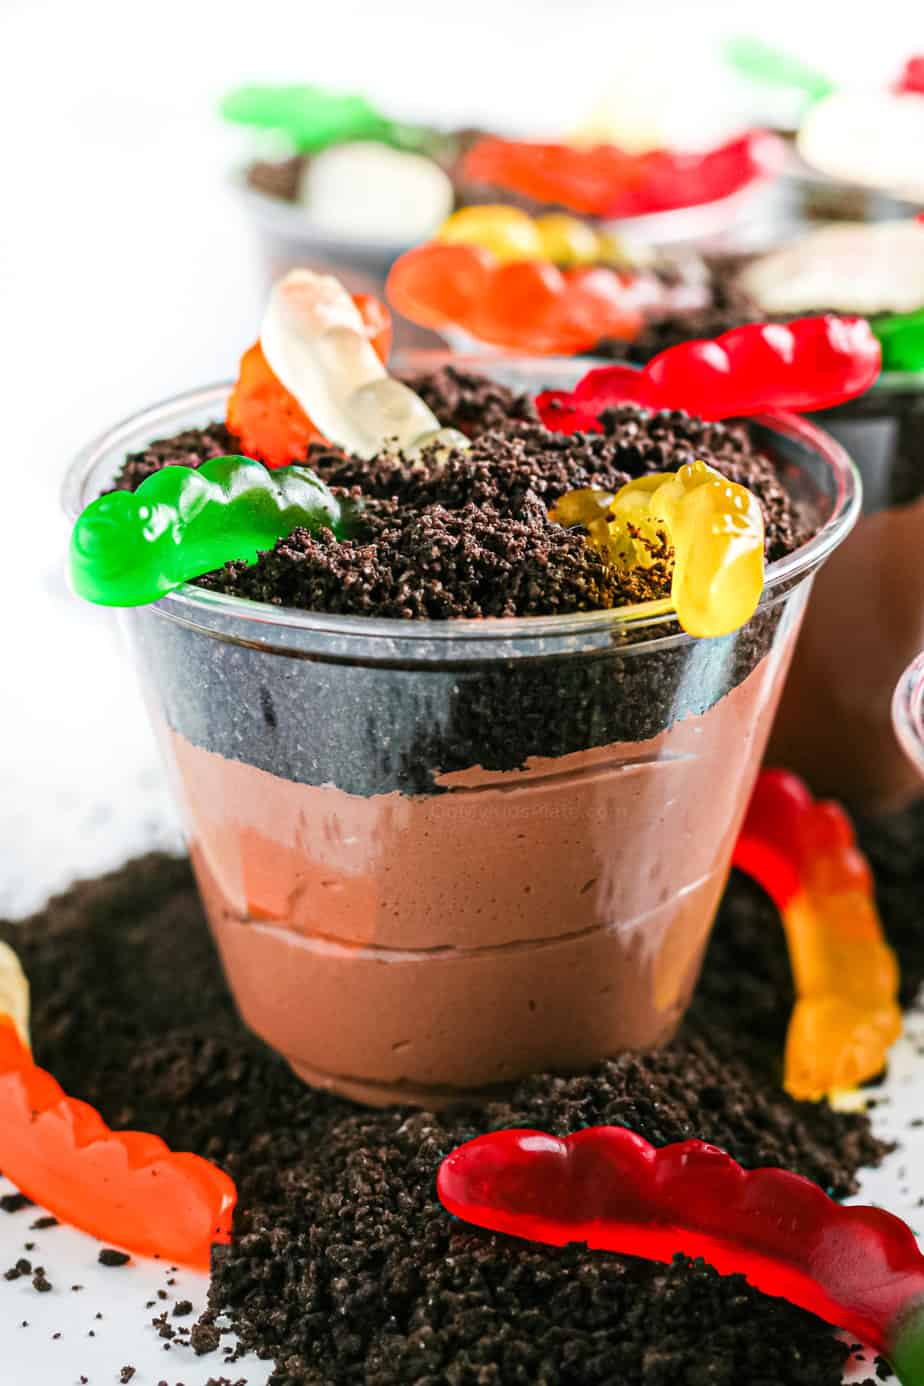 Chocolate pudding layered with oreo crumbs and gummy worms in a clear cup from the side